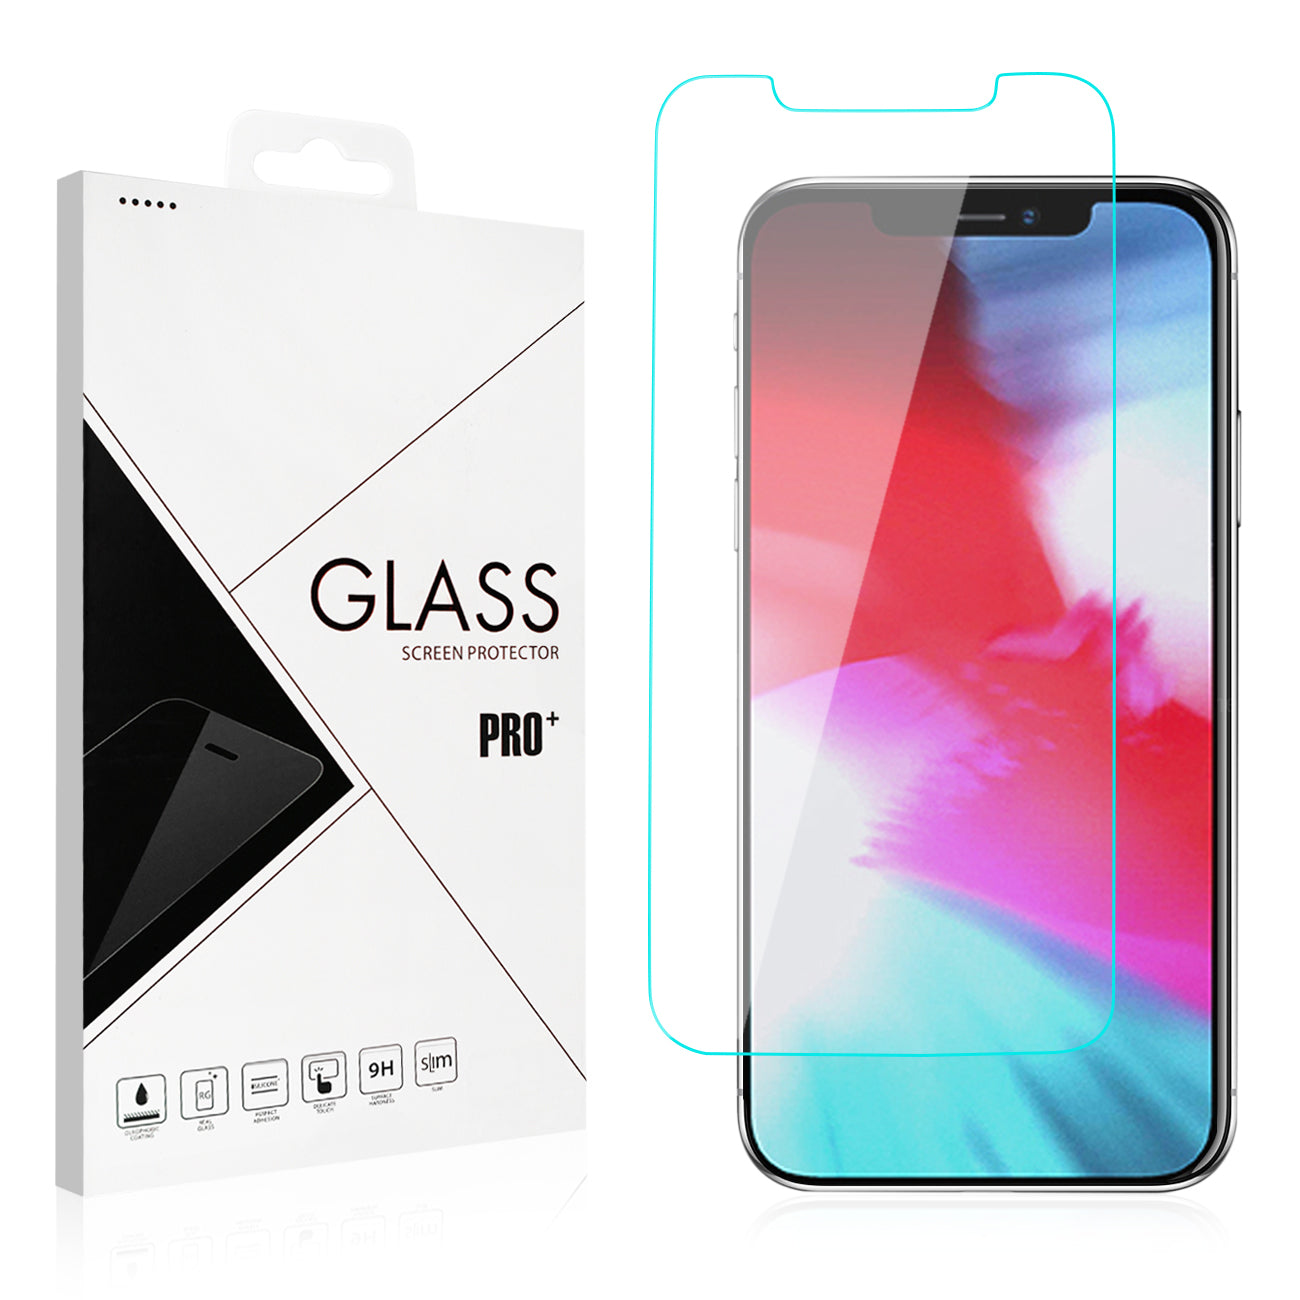 Premium Single retail Pack 2.5D Tempered Glass for iPhone 12 Pro Max 6.7 INCH